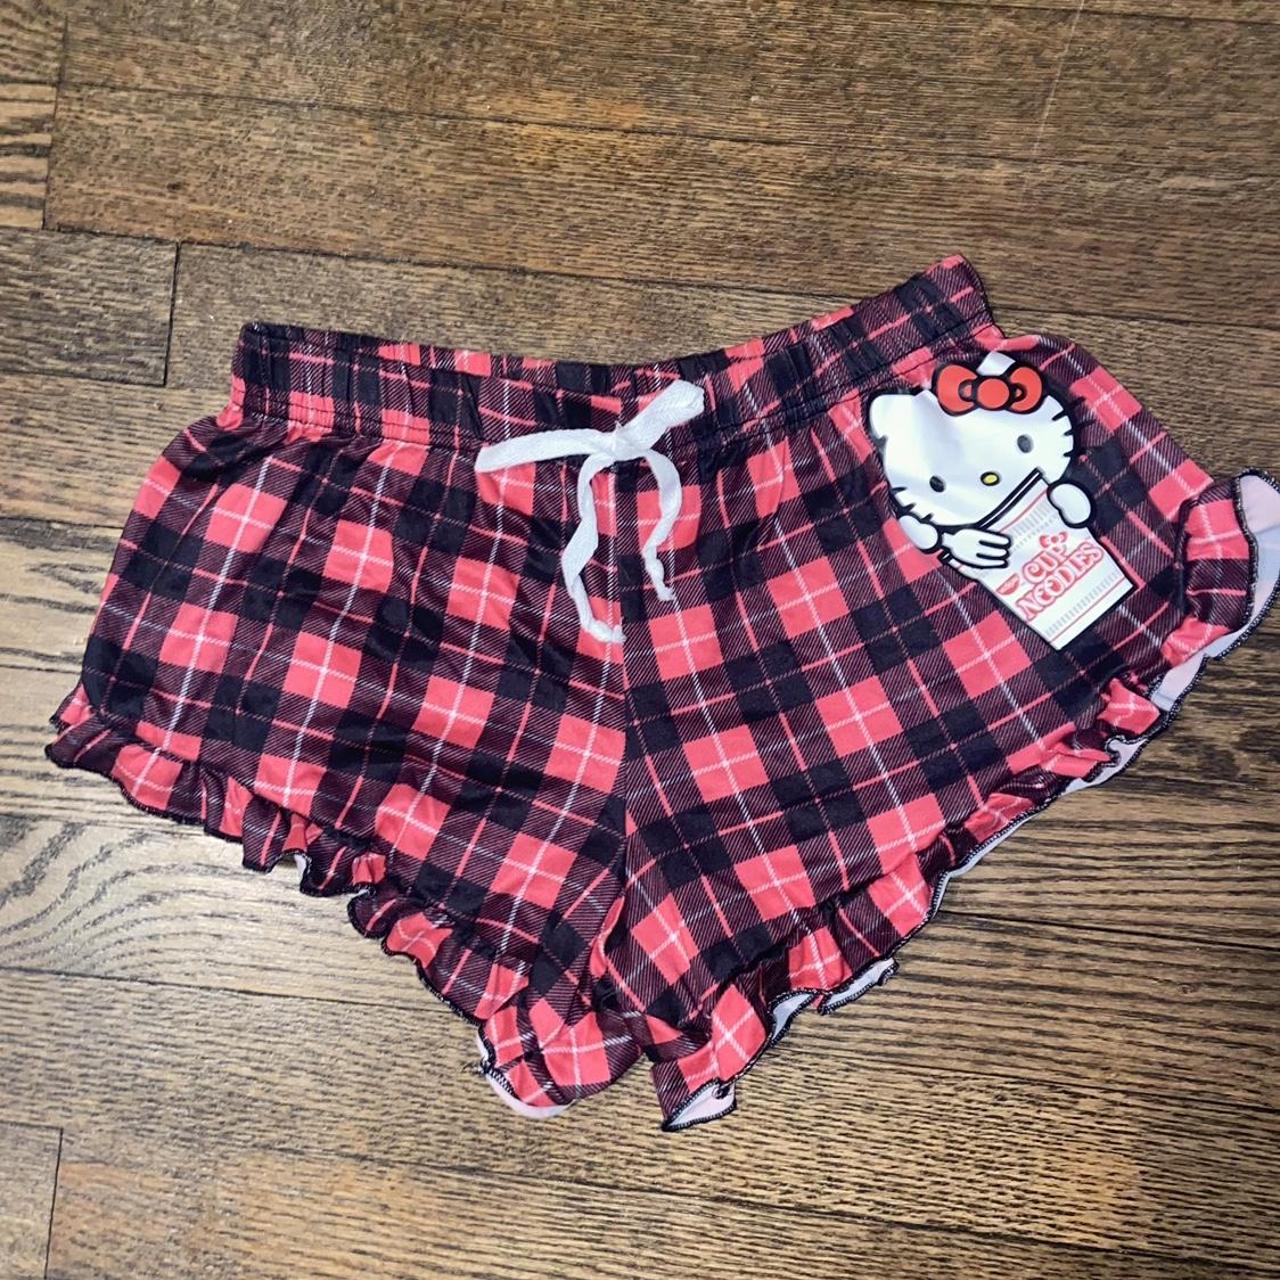 Cup Noodles x Hello Kitty pajama shorts size... - Depop